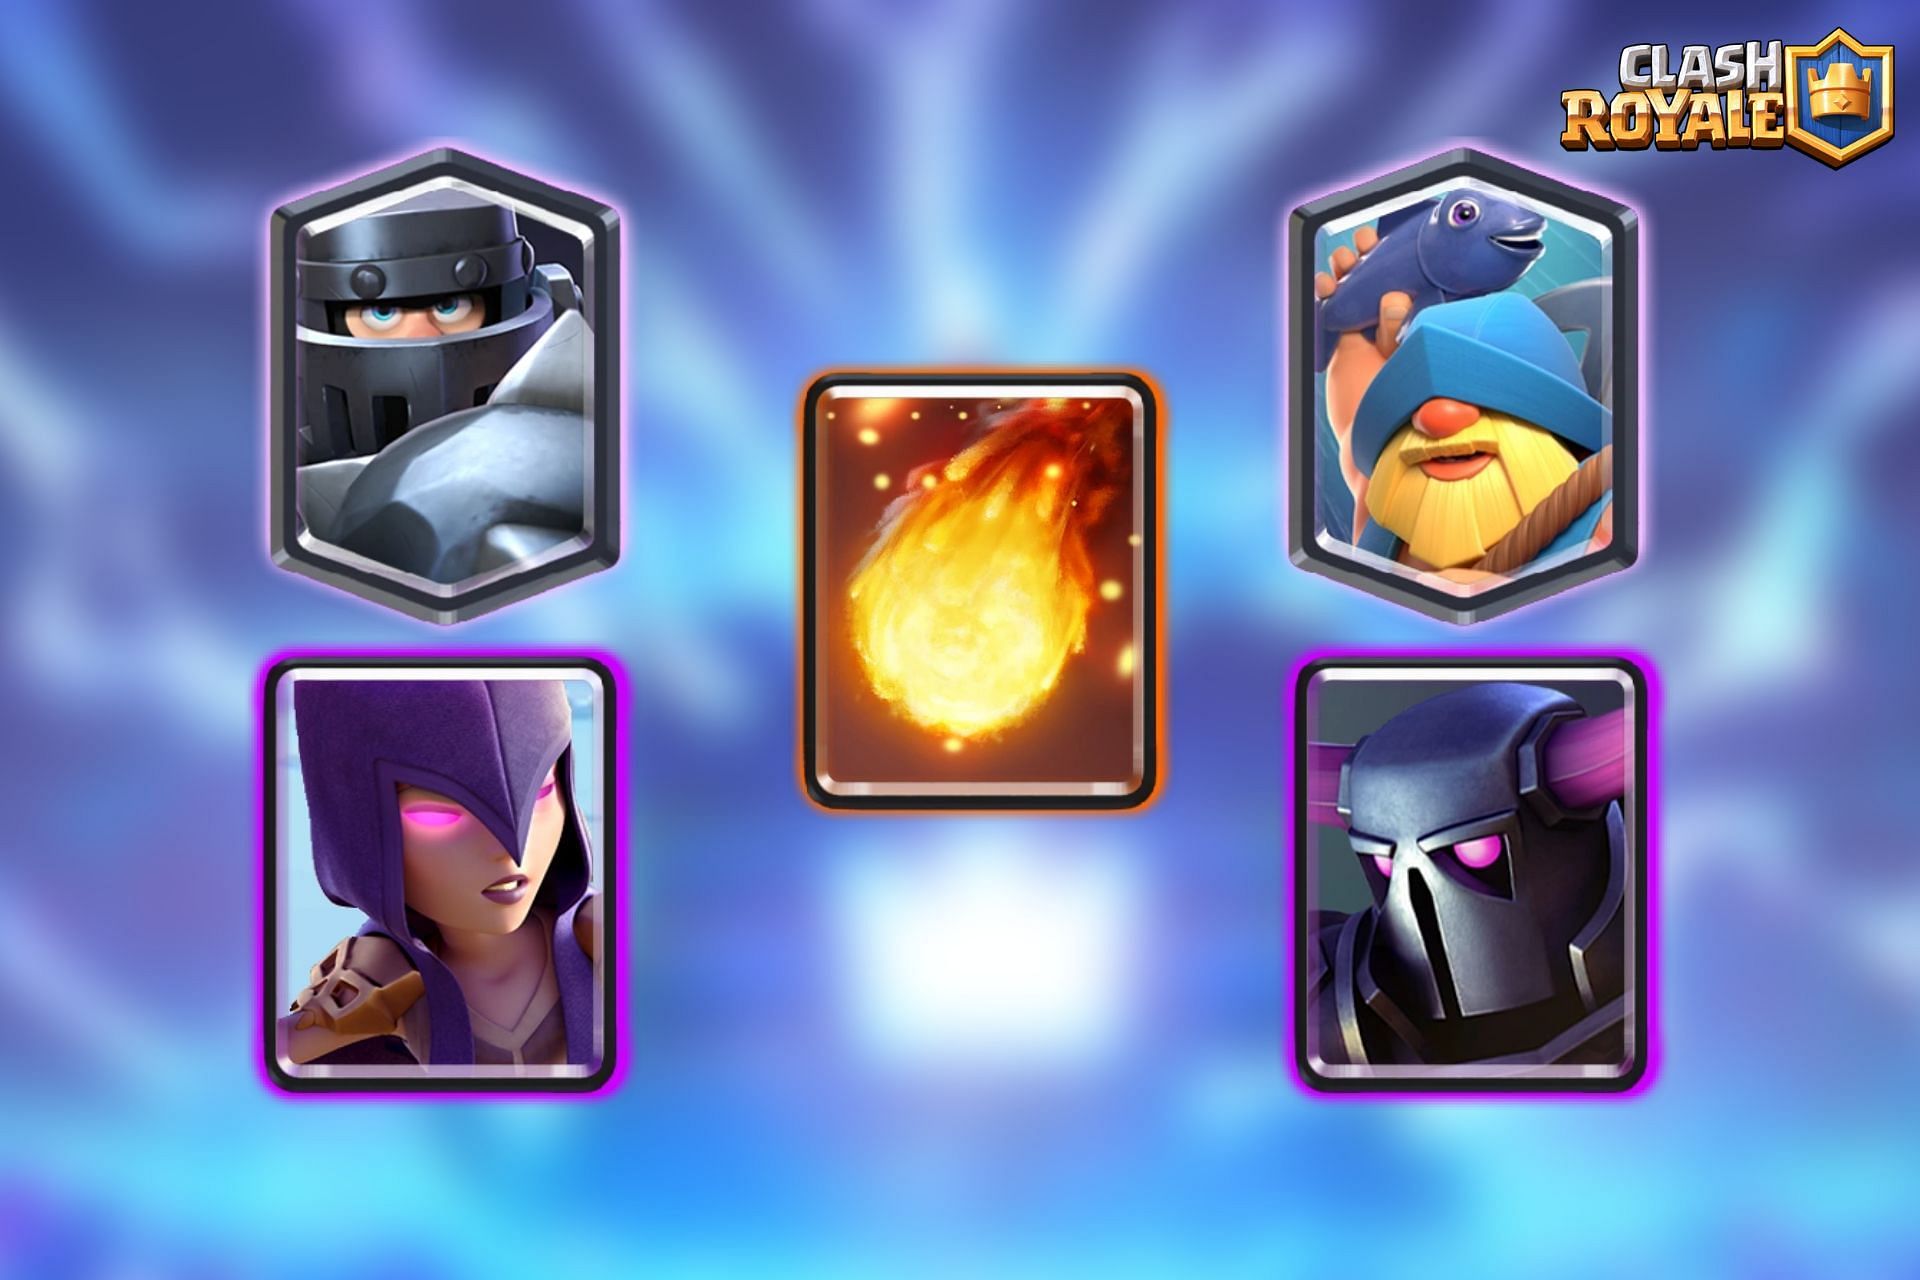 5 best cards to use in Mega Deck challenge in Clash Royale.